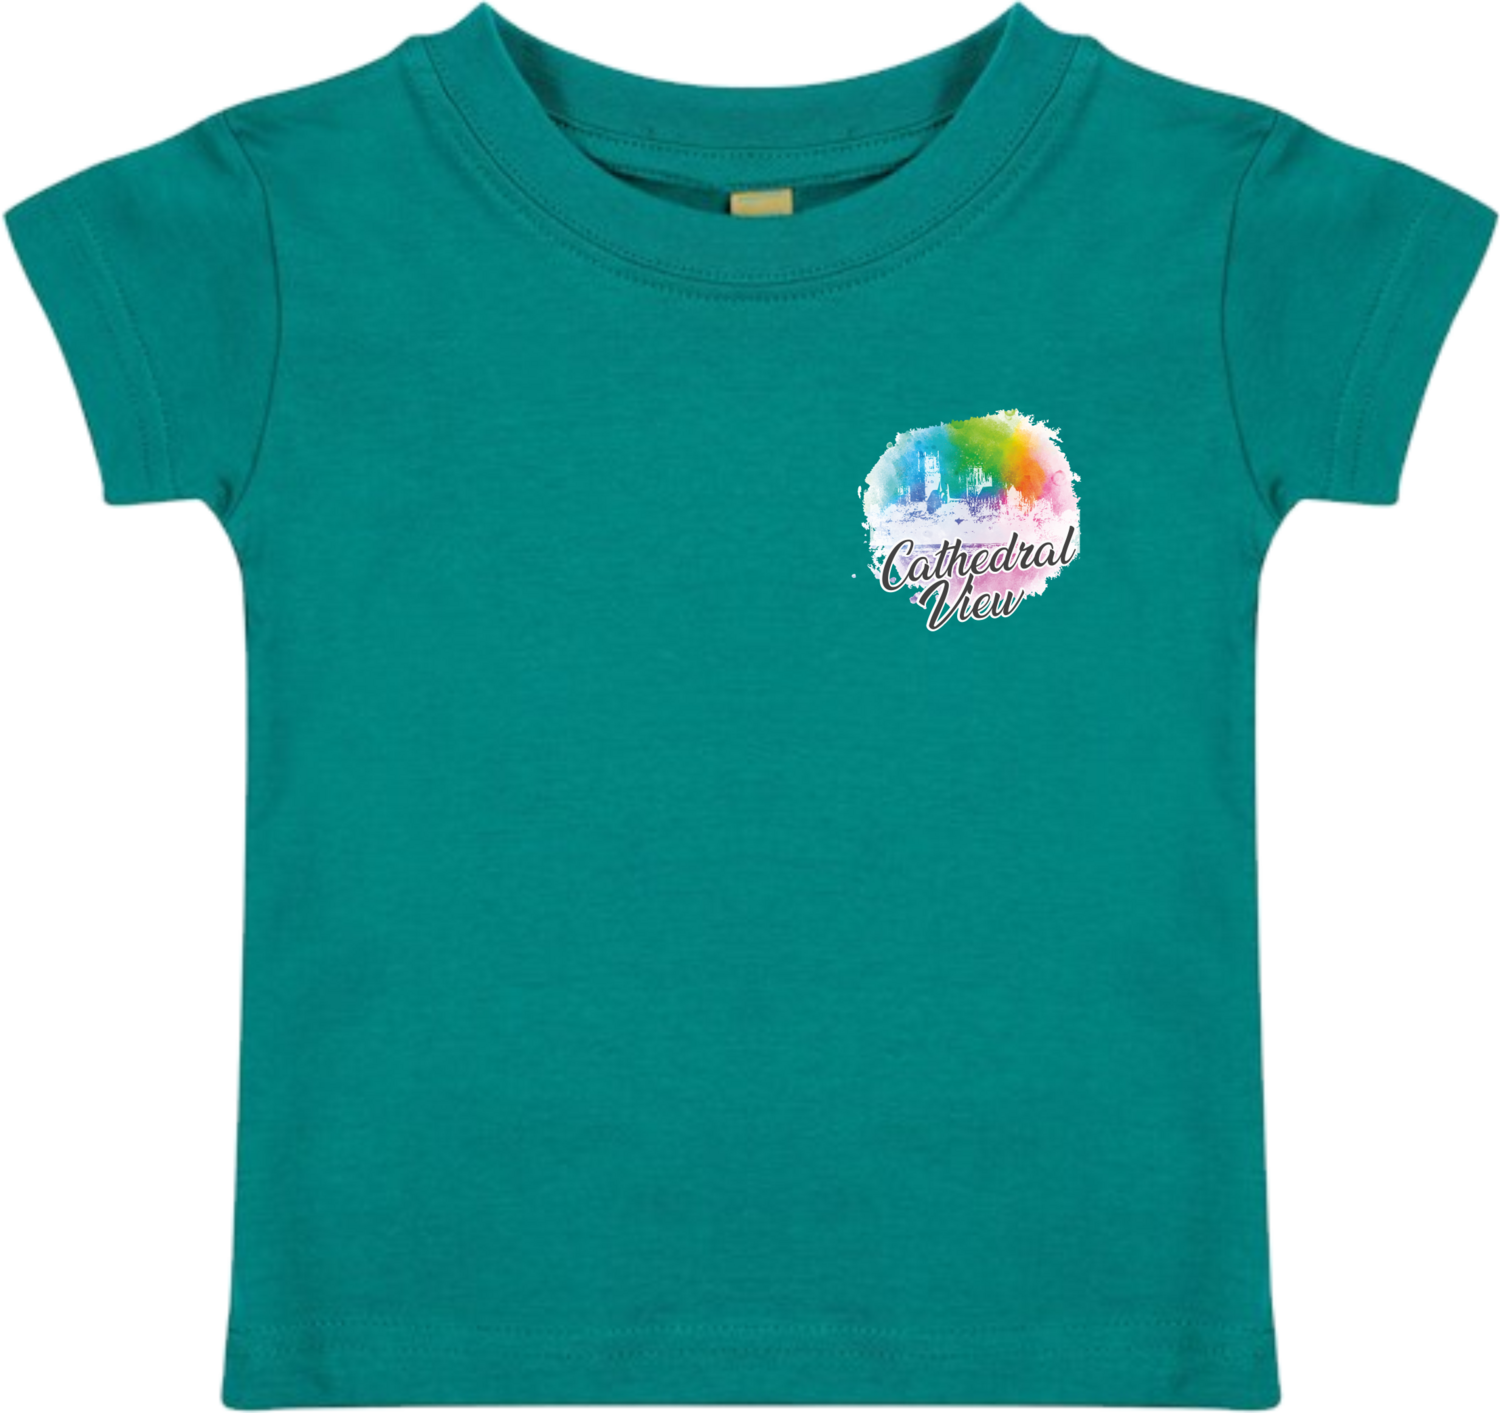 Cathedral View Toddler T-shirt